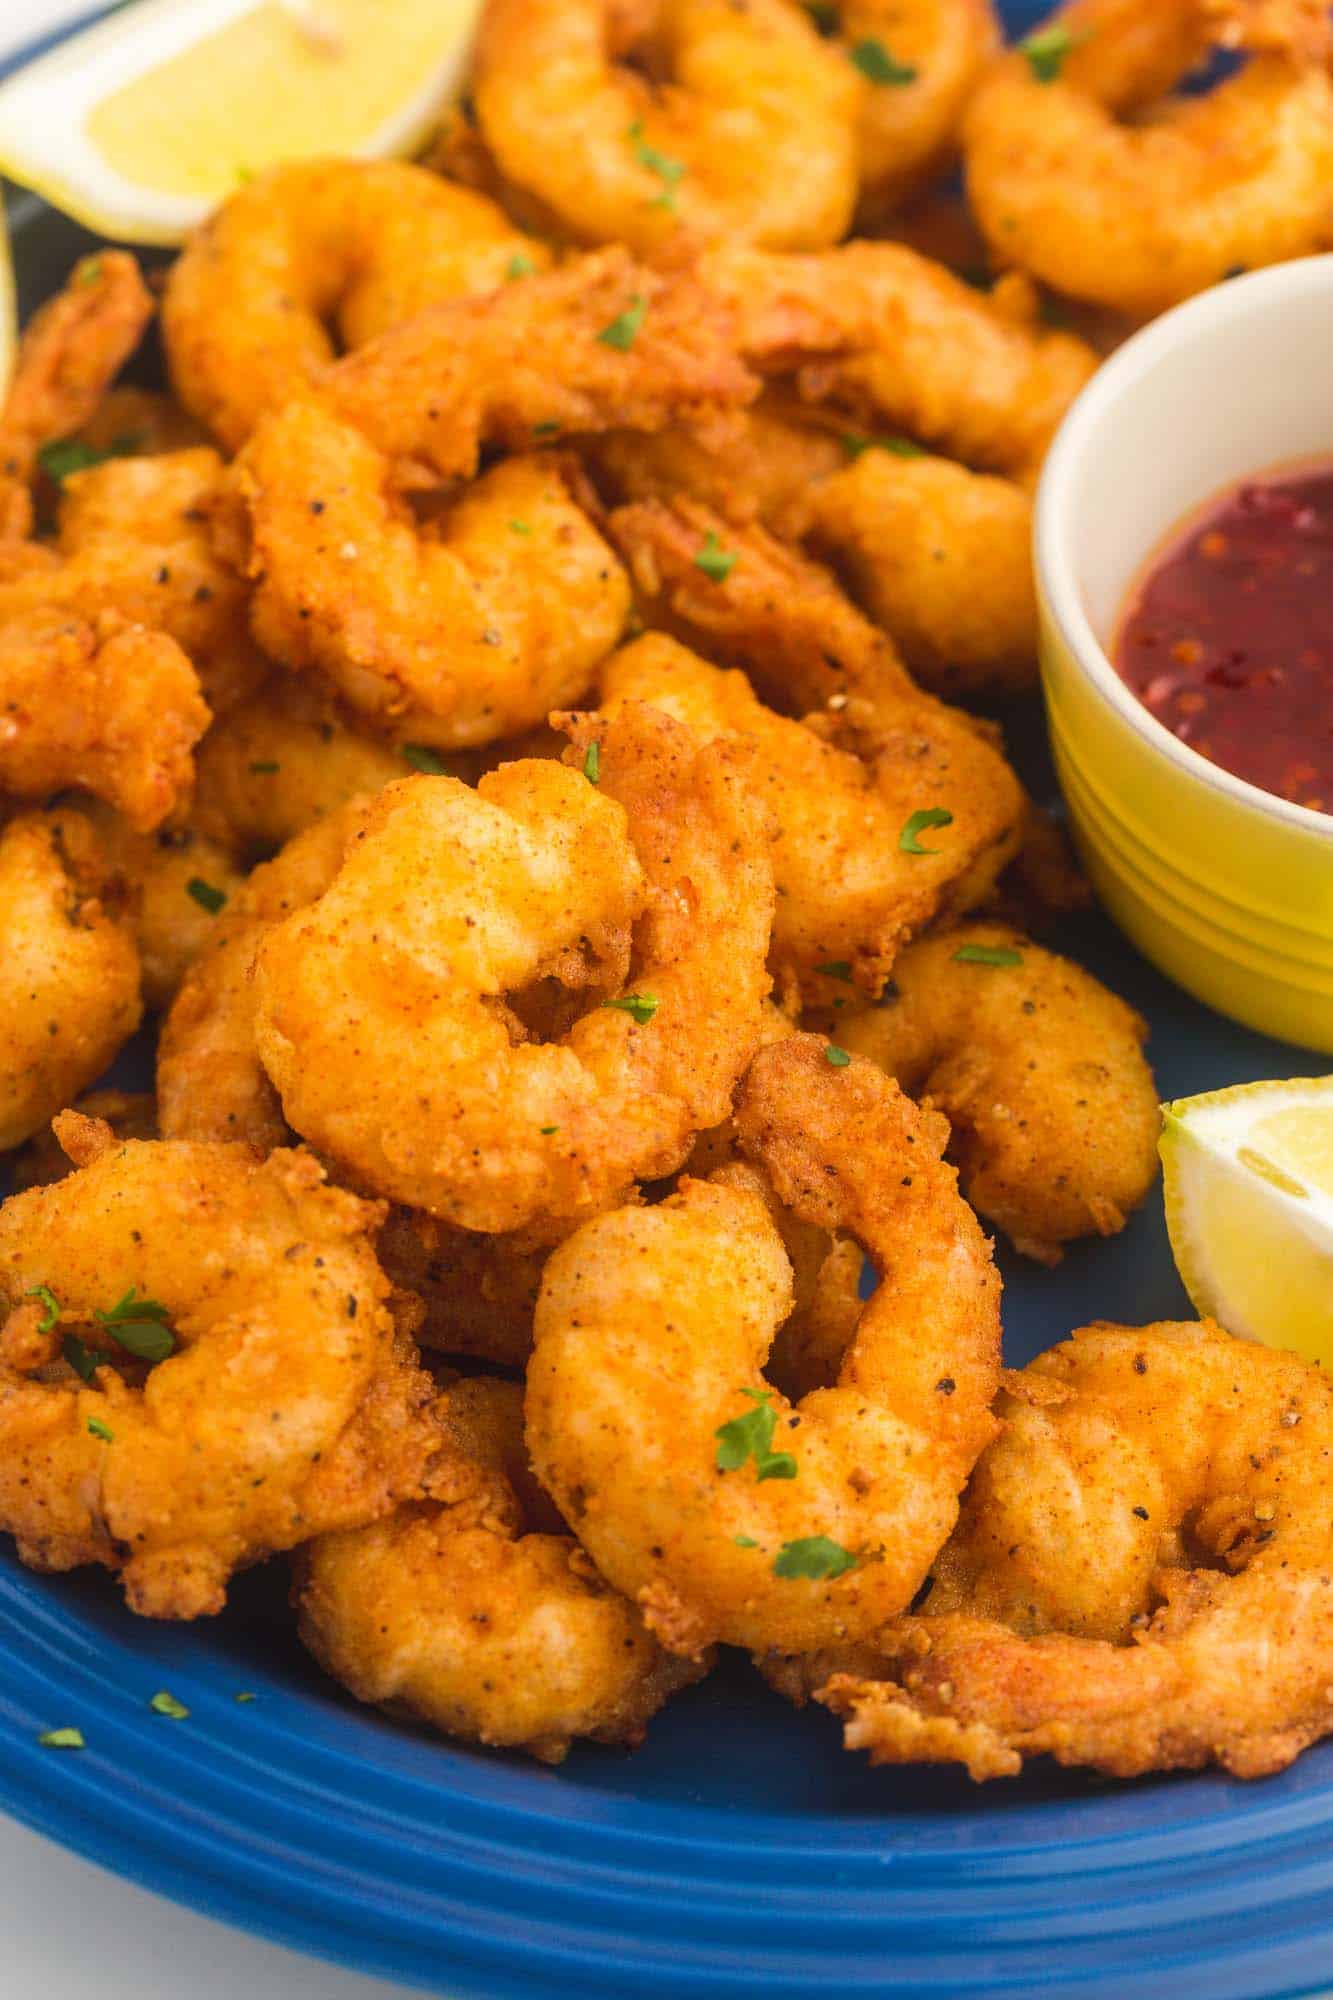 cropped image of a blue plate filled with fried shrimp. Lemon wedges garnish the plate and a cup of dipping sauce is on the side